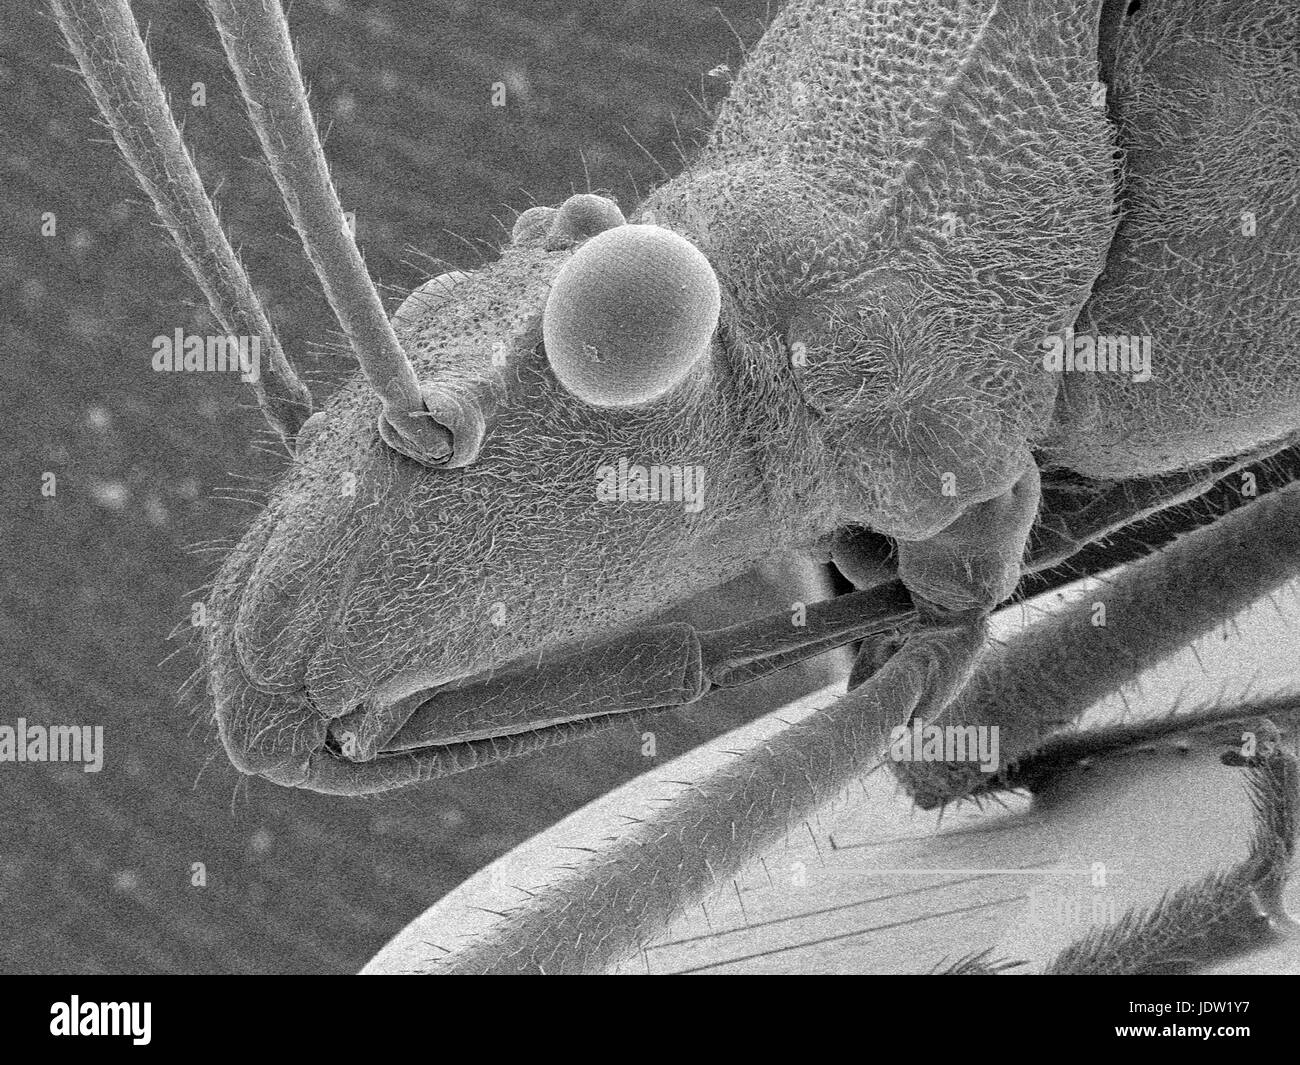 Magnified view of true bug Stock Photo